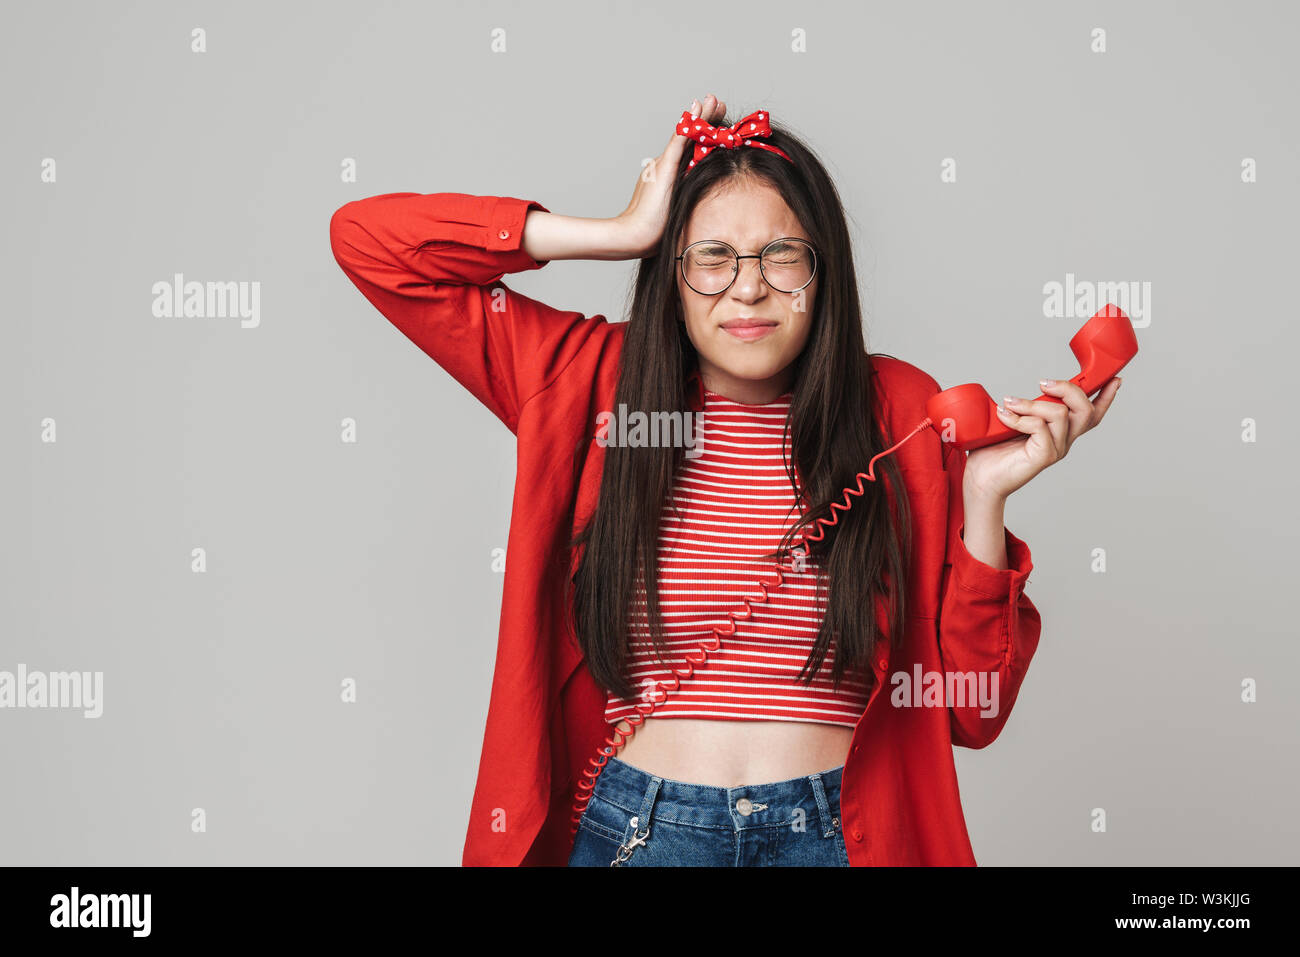 Cute upset teenage girl wearing casual outfit standing isolated over gray background, calling on landline phone Stock Photo